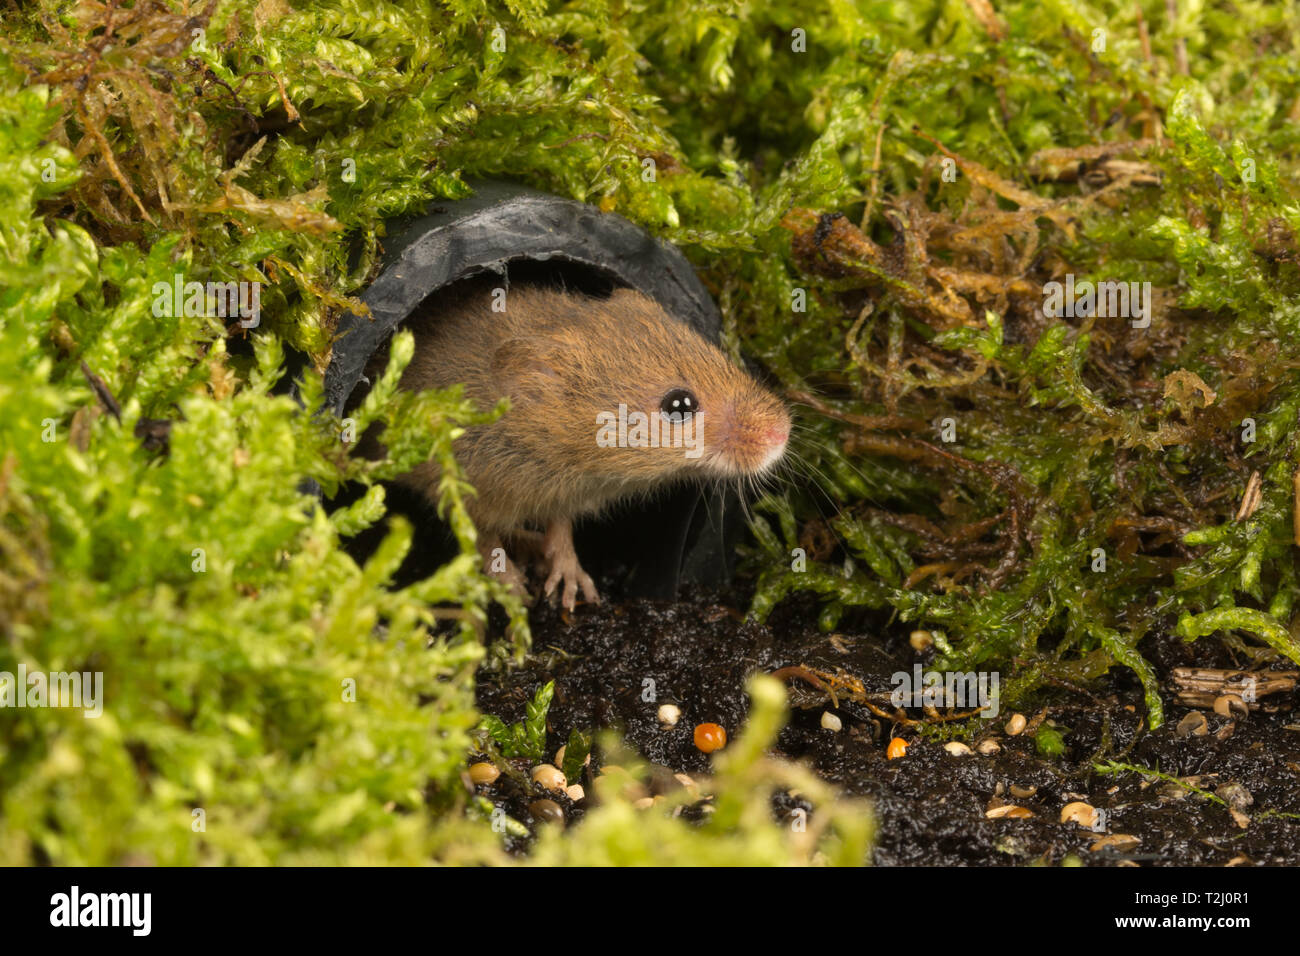 Harvest mouse (Micromys minutus), a small mammal or rodent species, peeping out of a pipe. Cute animal. Stock Photo